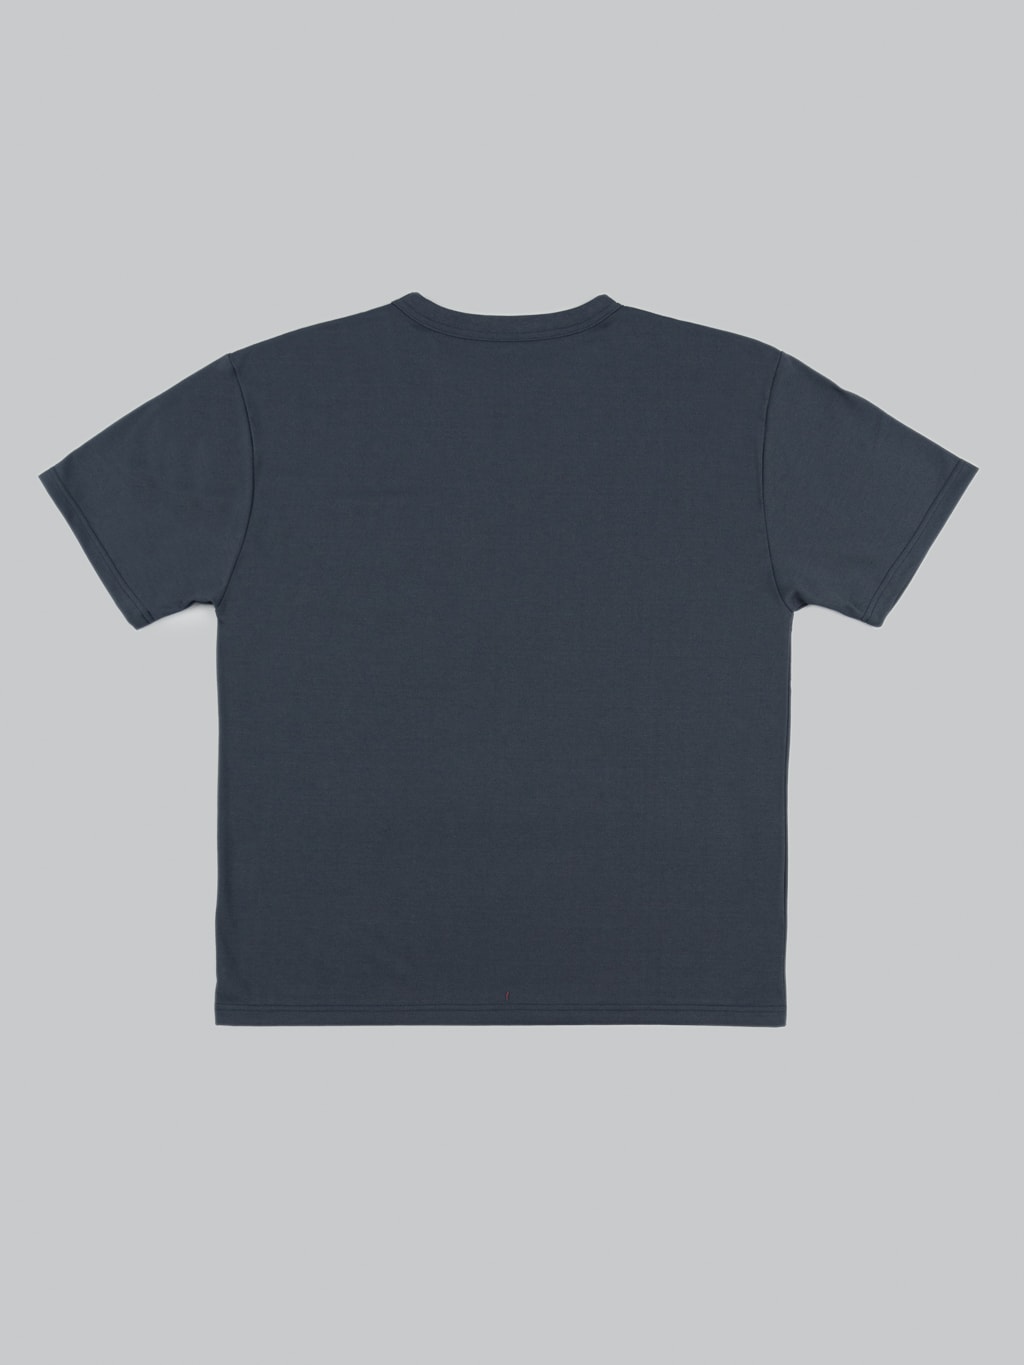 trophy clothing monochrome pc pocket tee charcoal  back